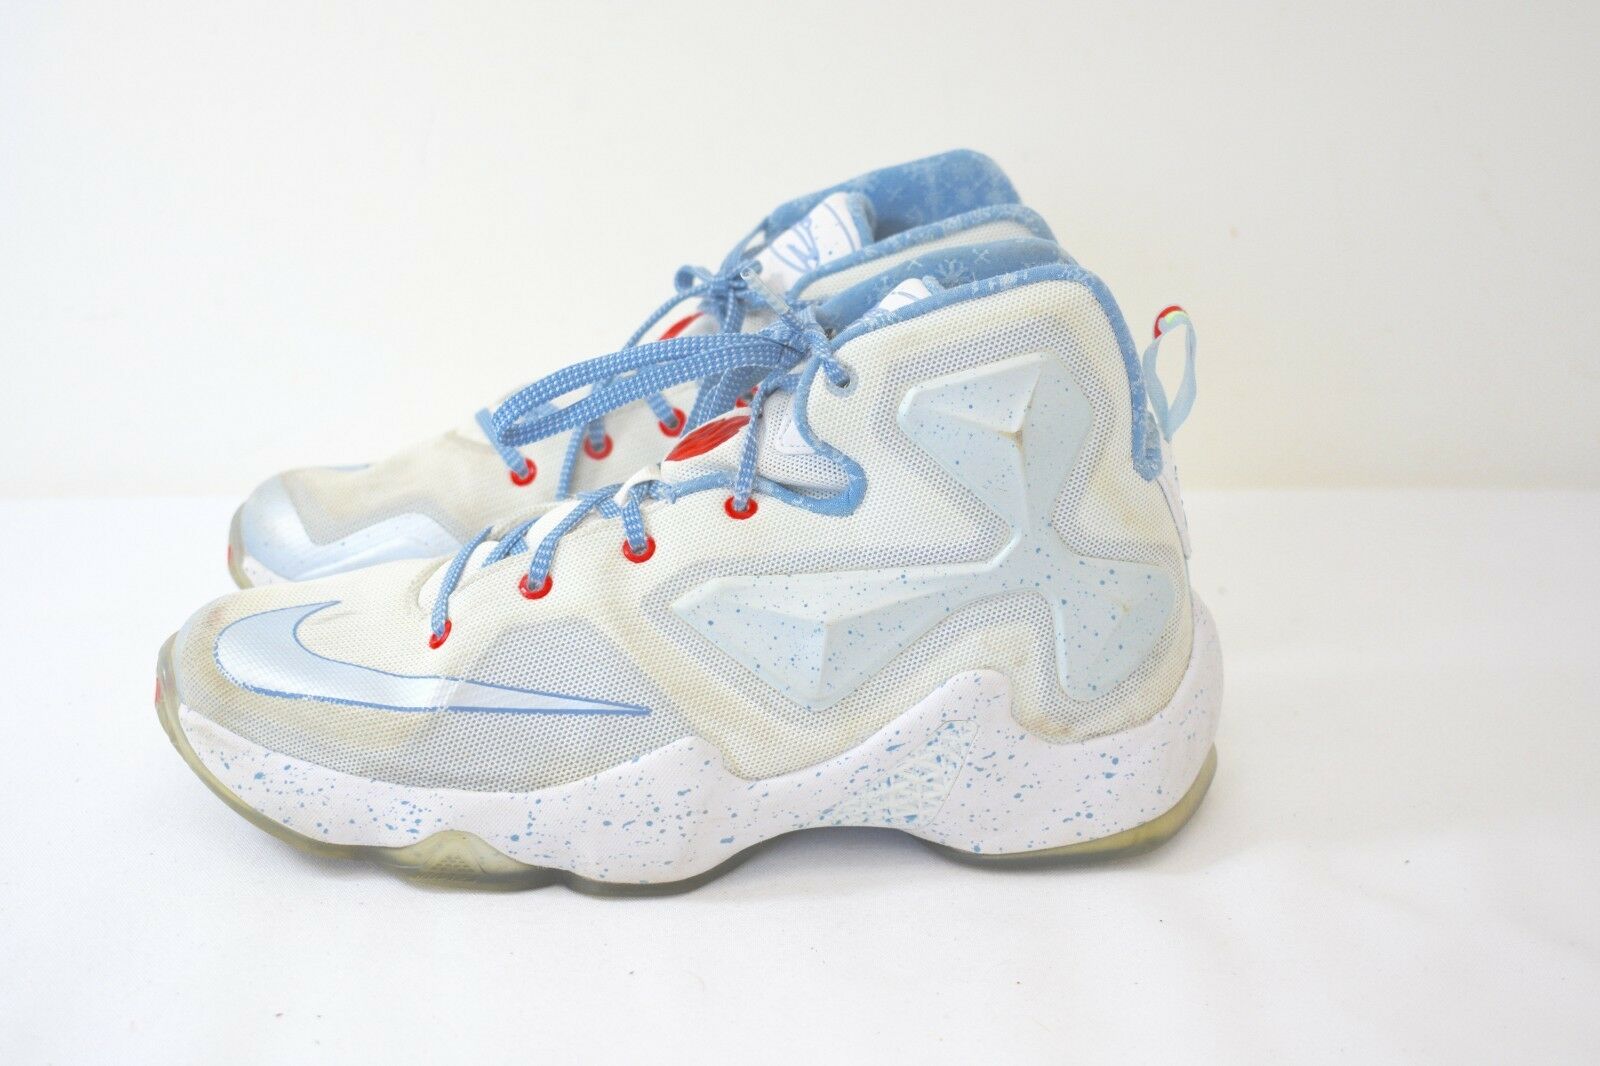 NIKE Lebron James White/Blue Fabric/Leather Athletic Shoes Size 6Y On Sale